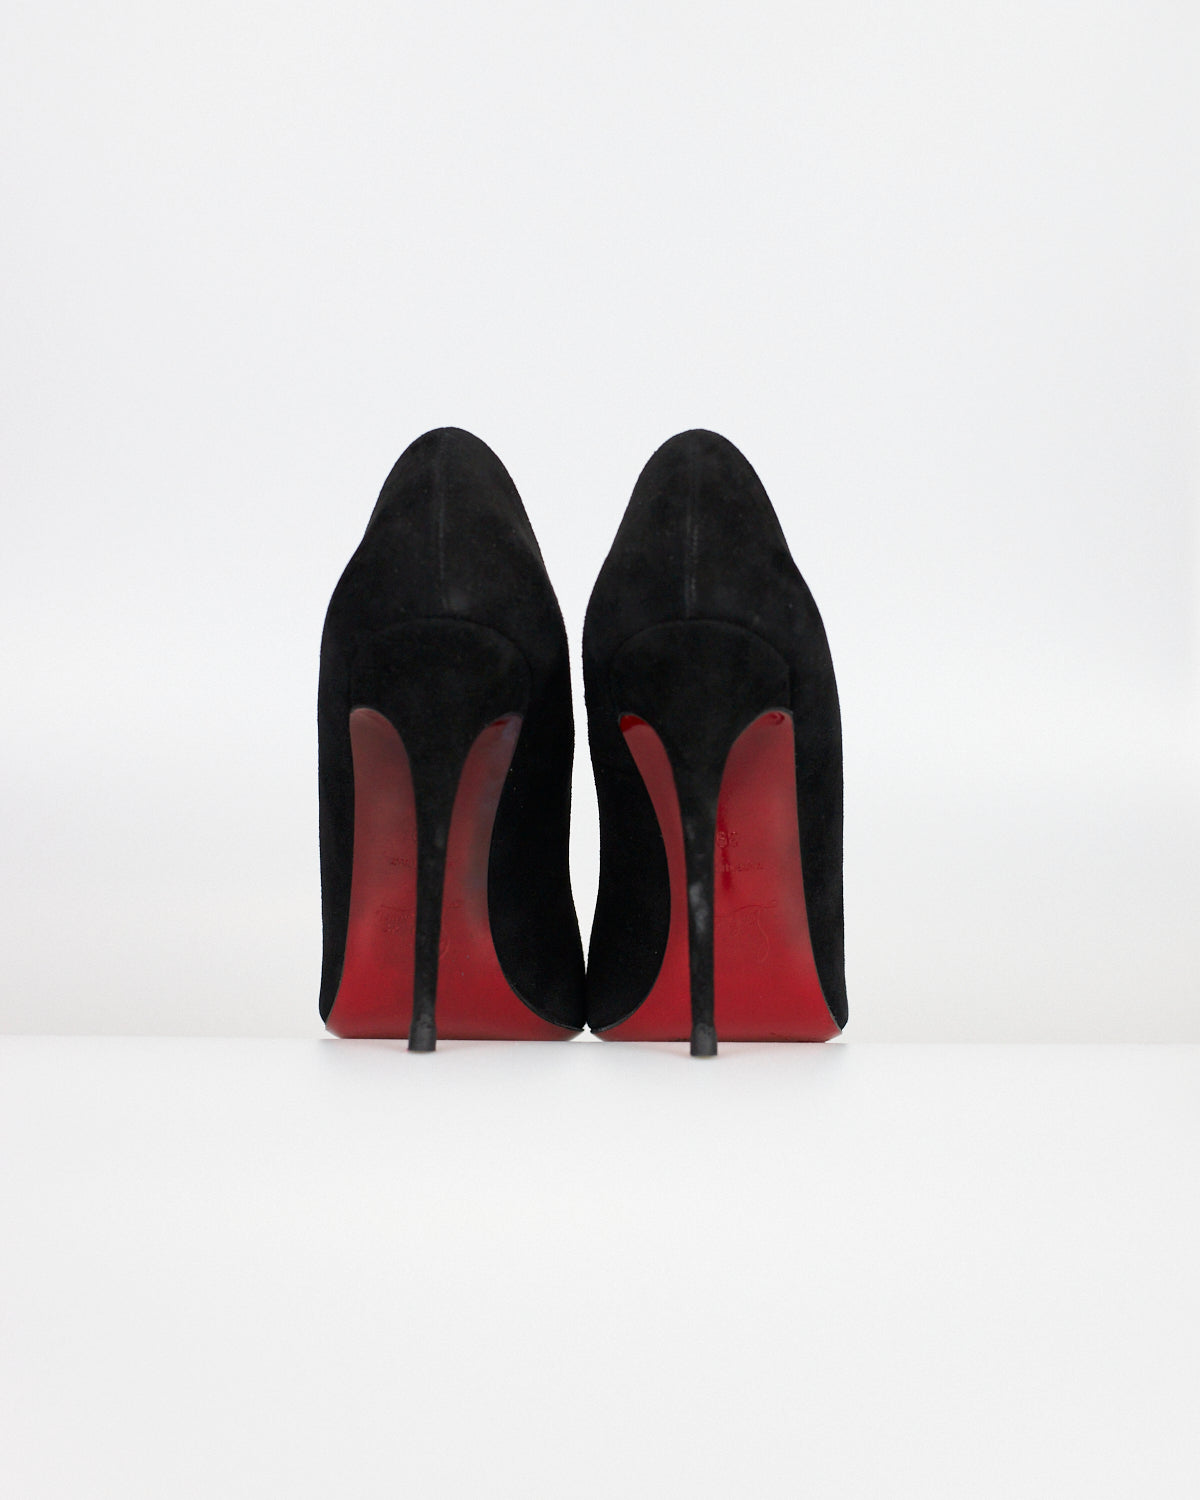 CHRISTIAN LOUBOUTIN Kate 100 Suede Pumps - Size 39